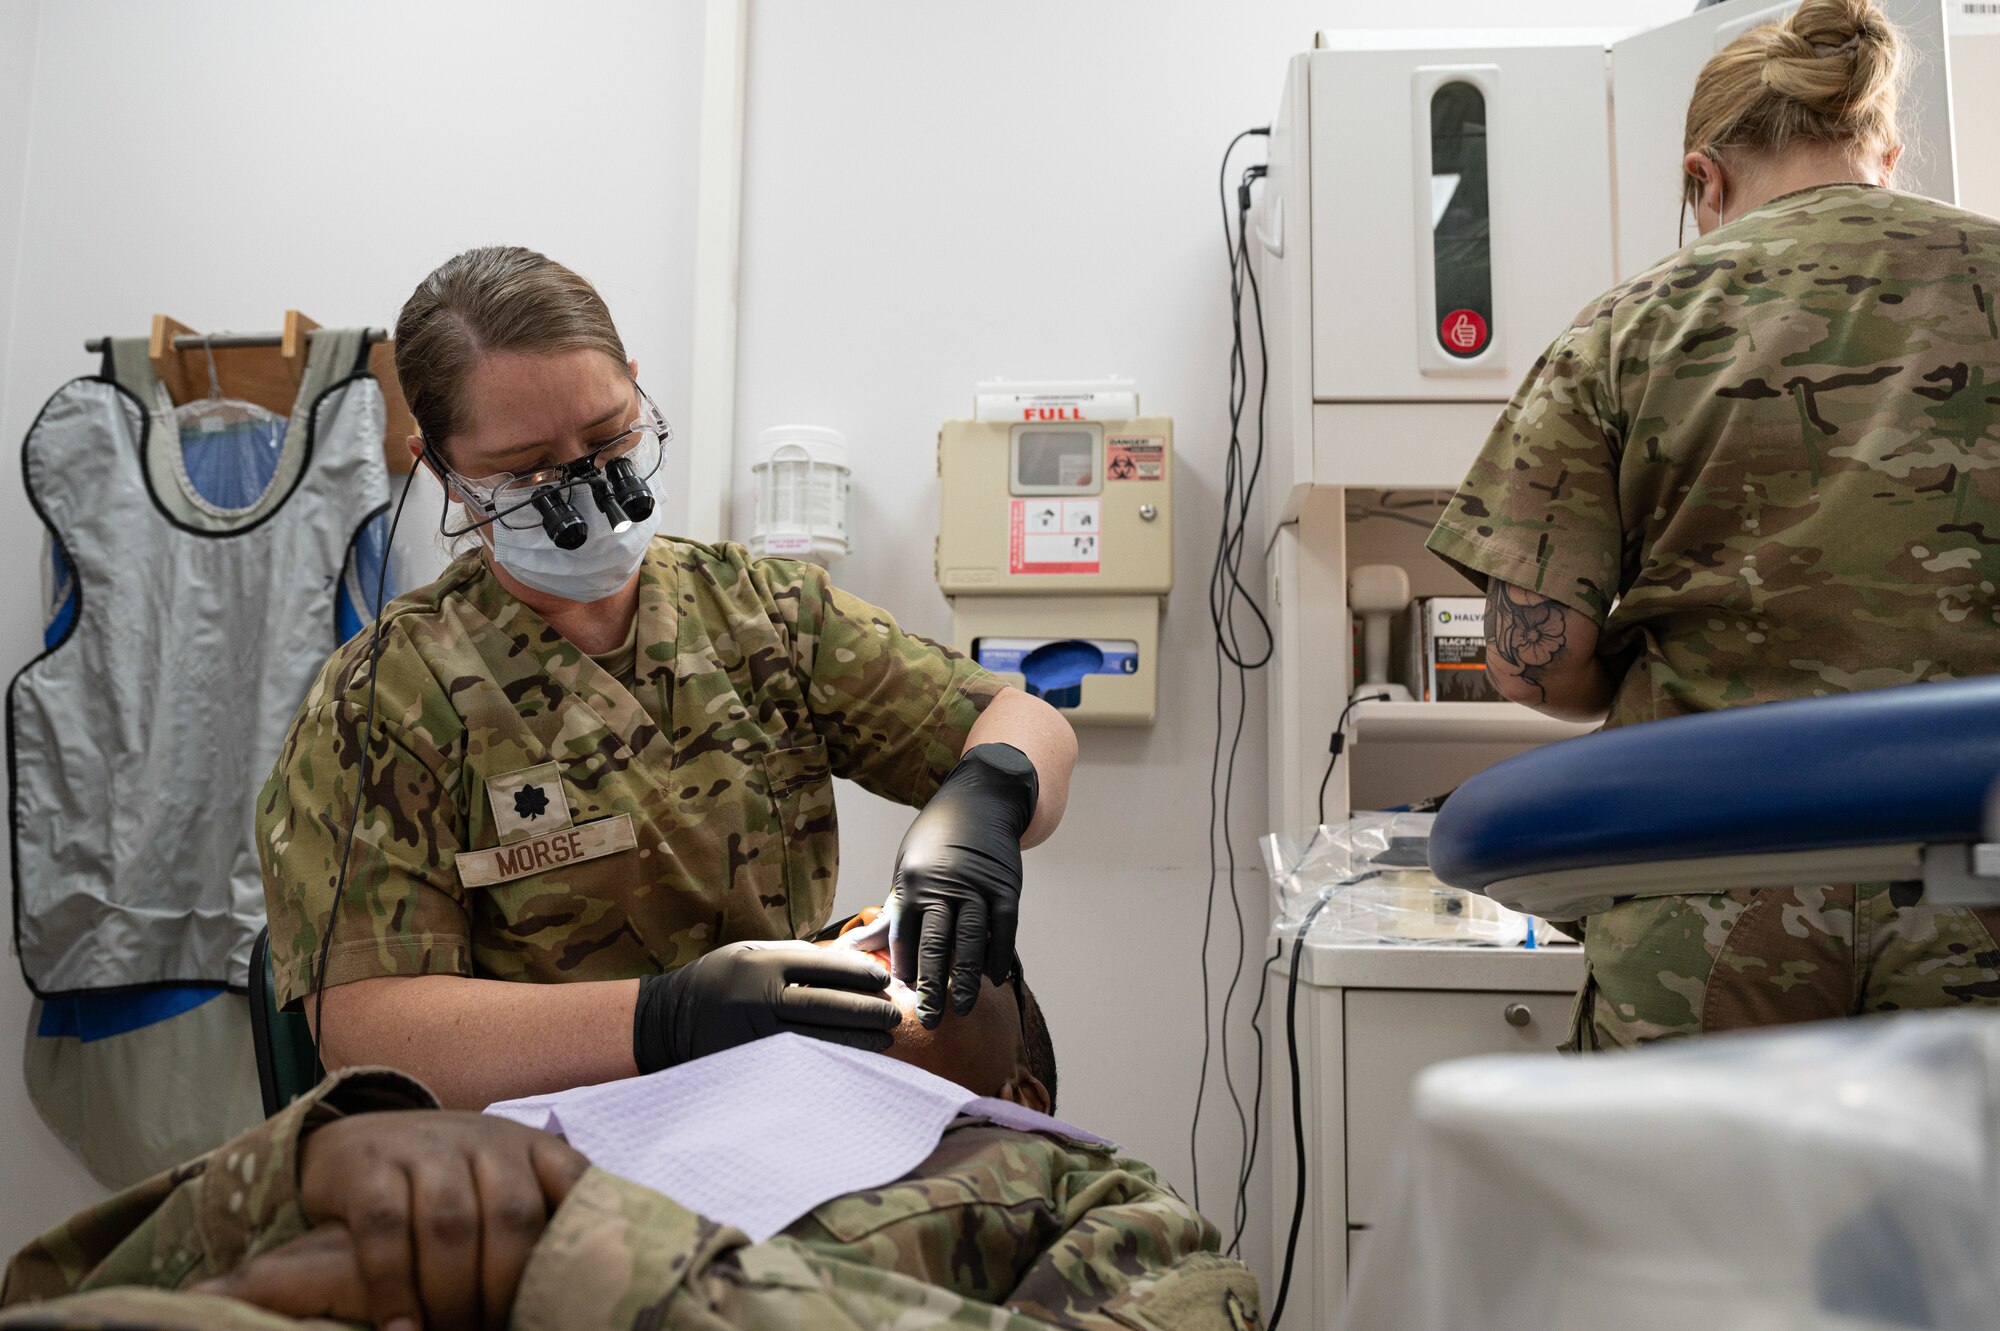 When a service member experiences dental issues or pain, it becomes a distraction from the mission. The 386th Expeditionary Medical Group Dental Clinic services include root canals and extractions, along with other emergency care for all members. Permanent party members will also receive annual exams and teeth cleanings.